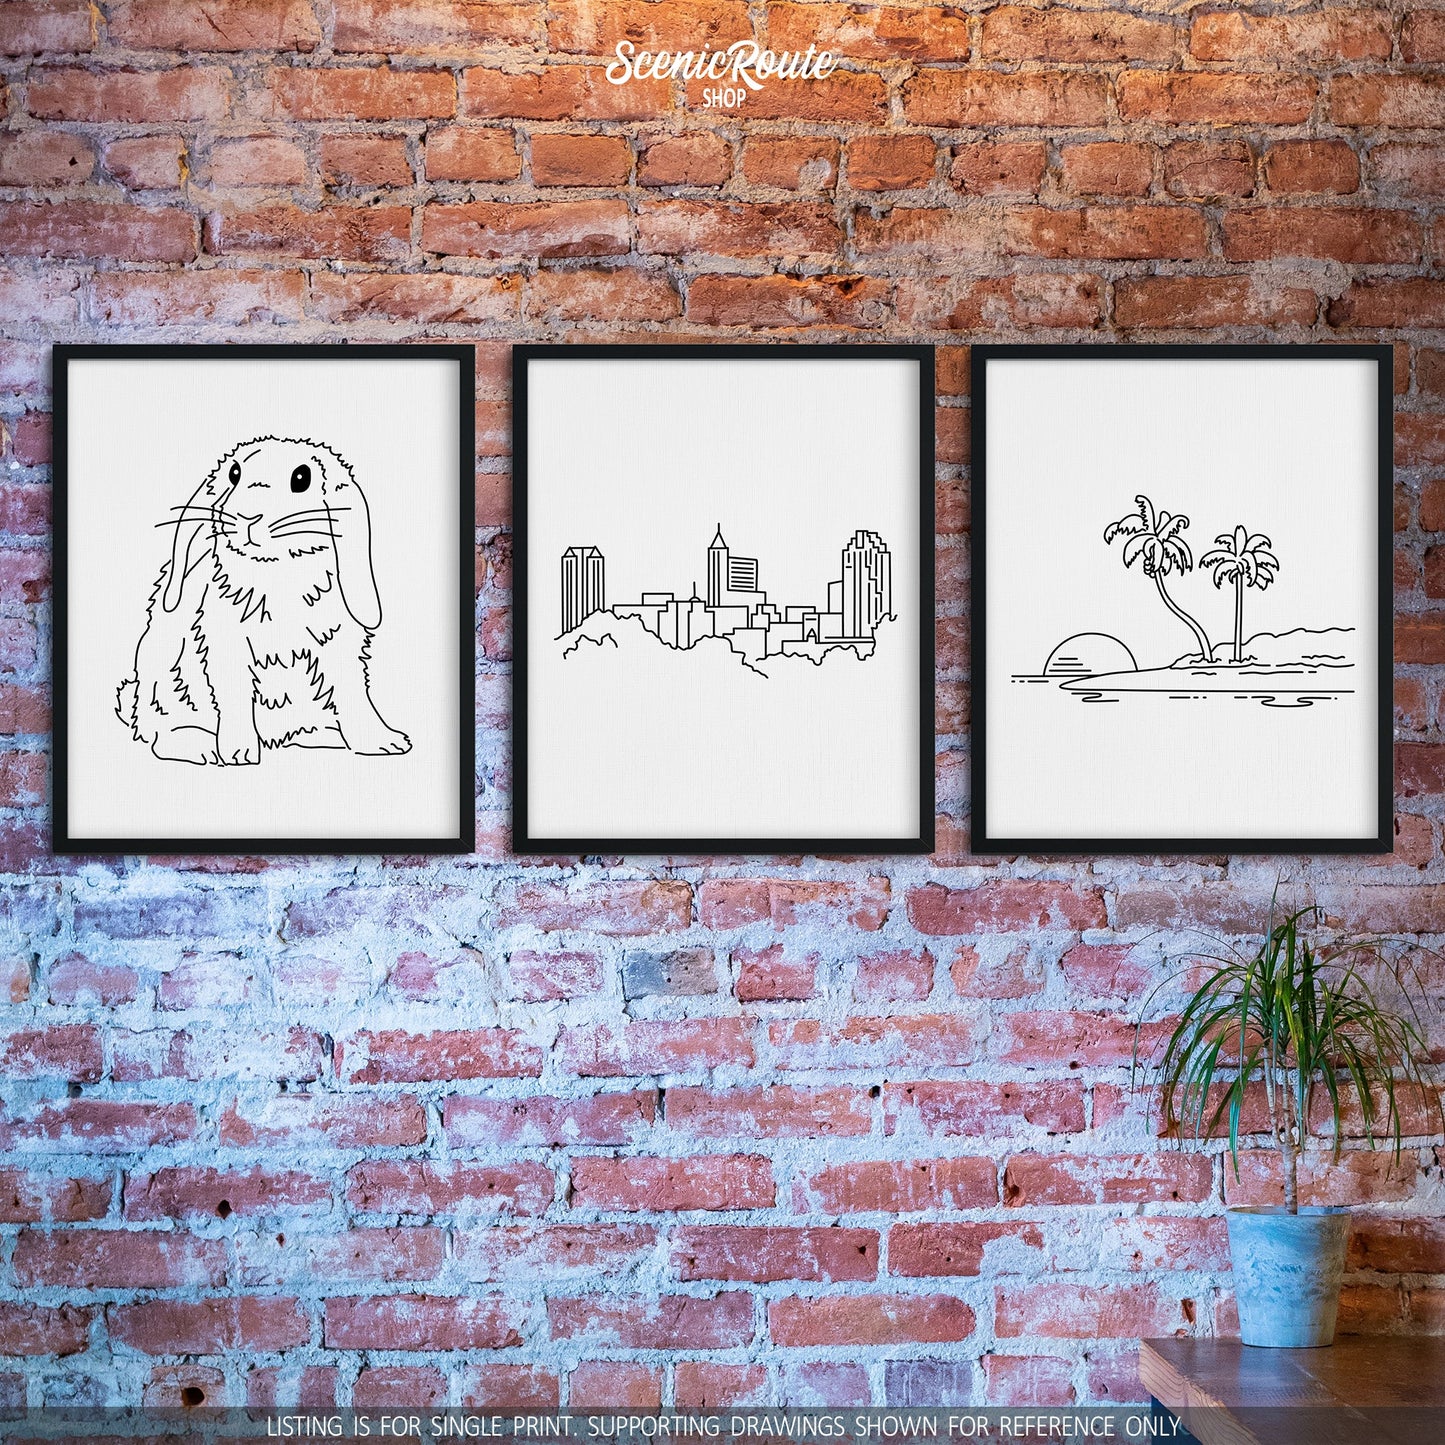 A group of three framed drawings on a brick wall. The line art drawings include a Mini Lop Rabbit, Raleigh Skyline, and Island